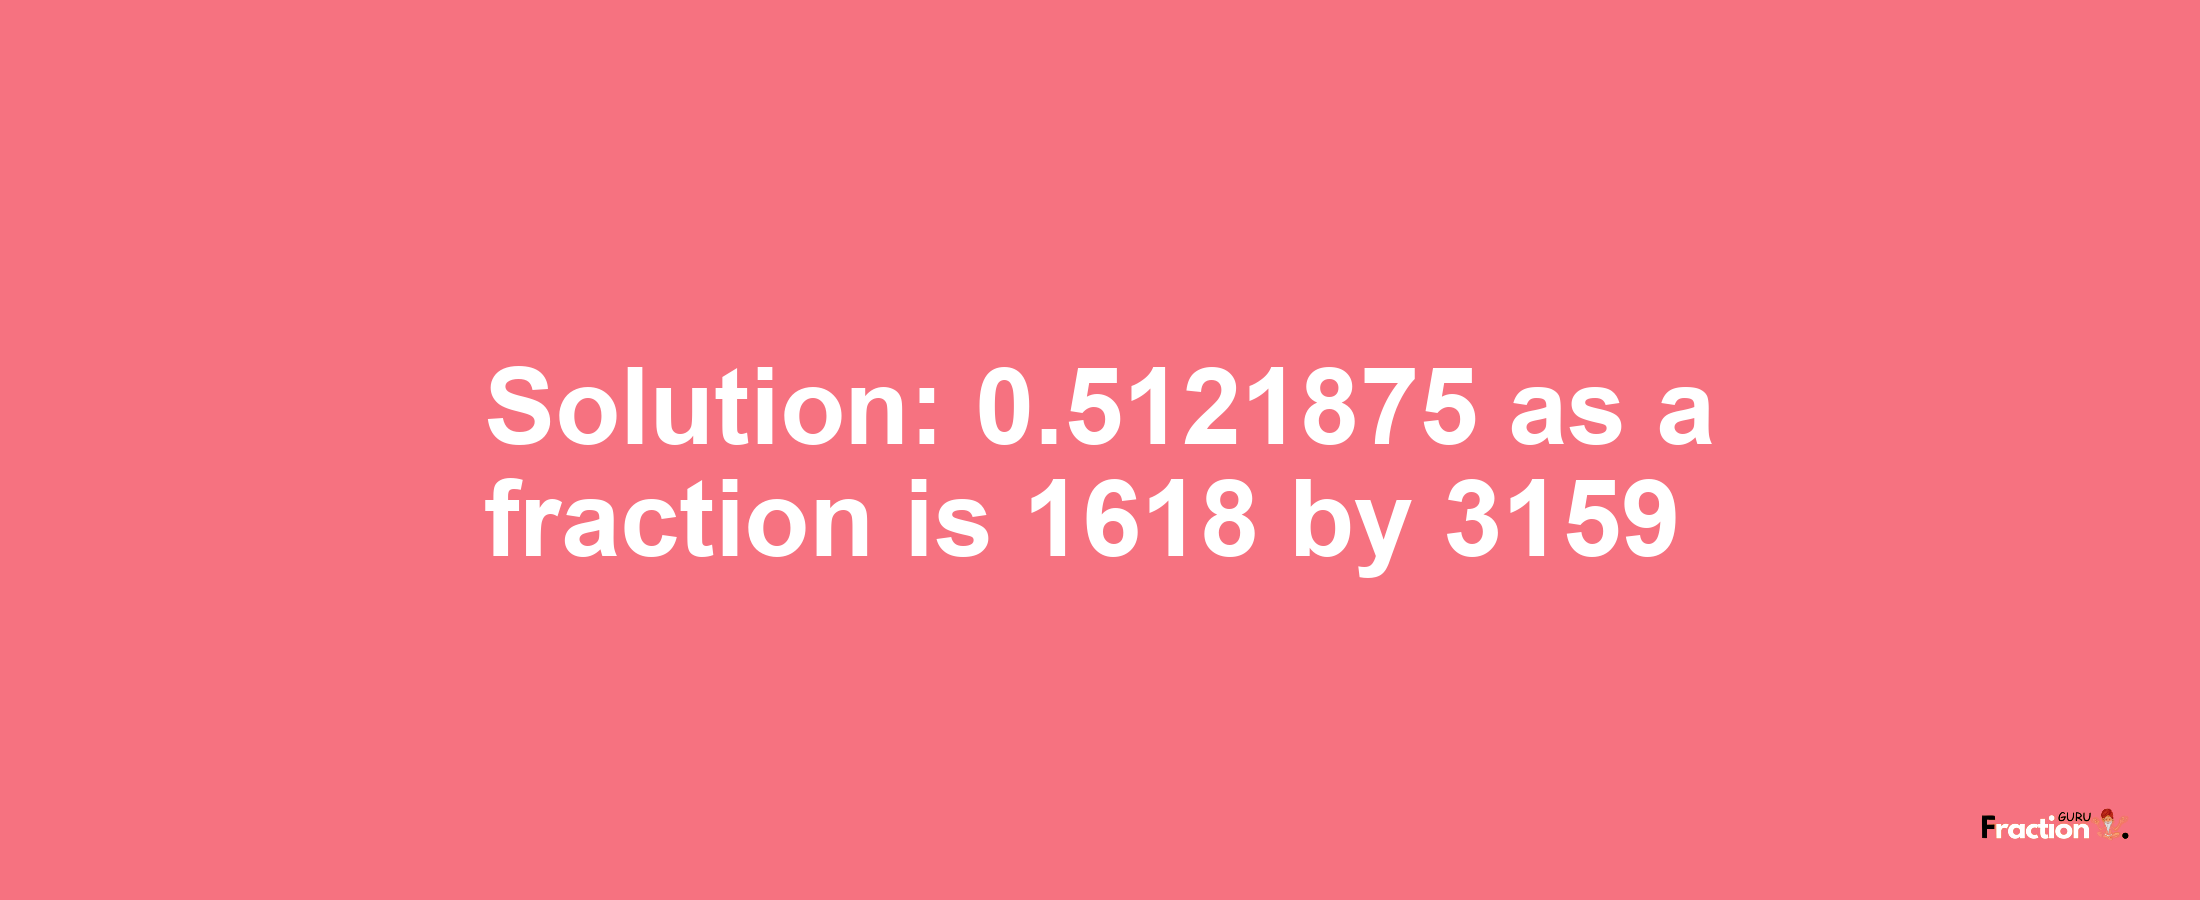 Solution:0.5121875 as a fraction is 1618/3159